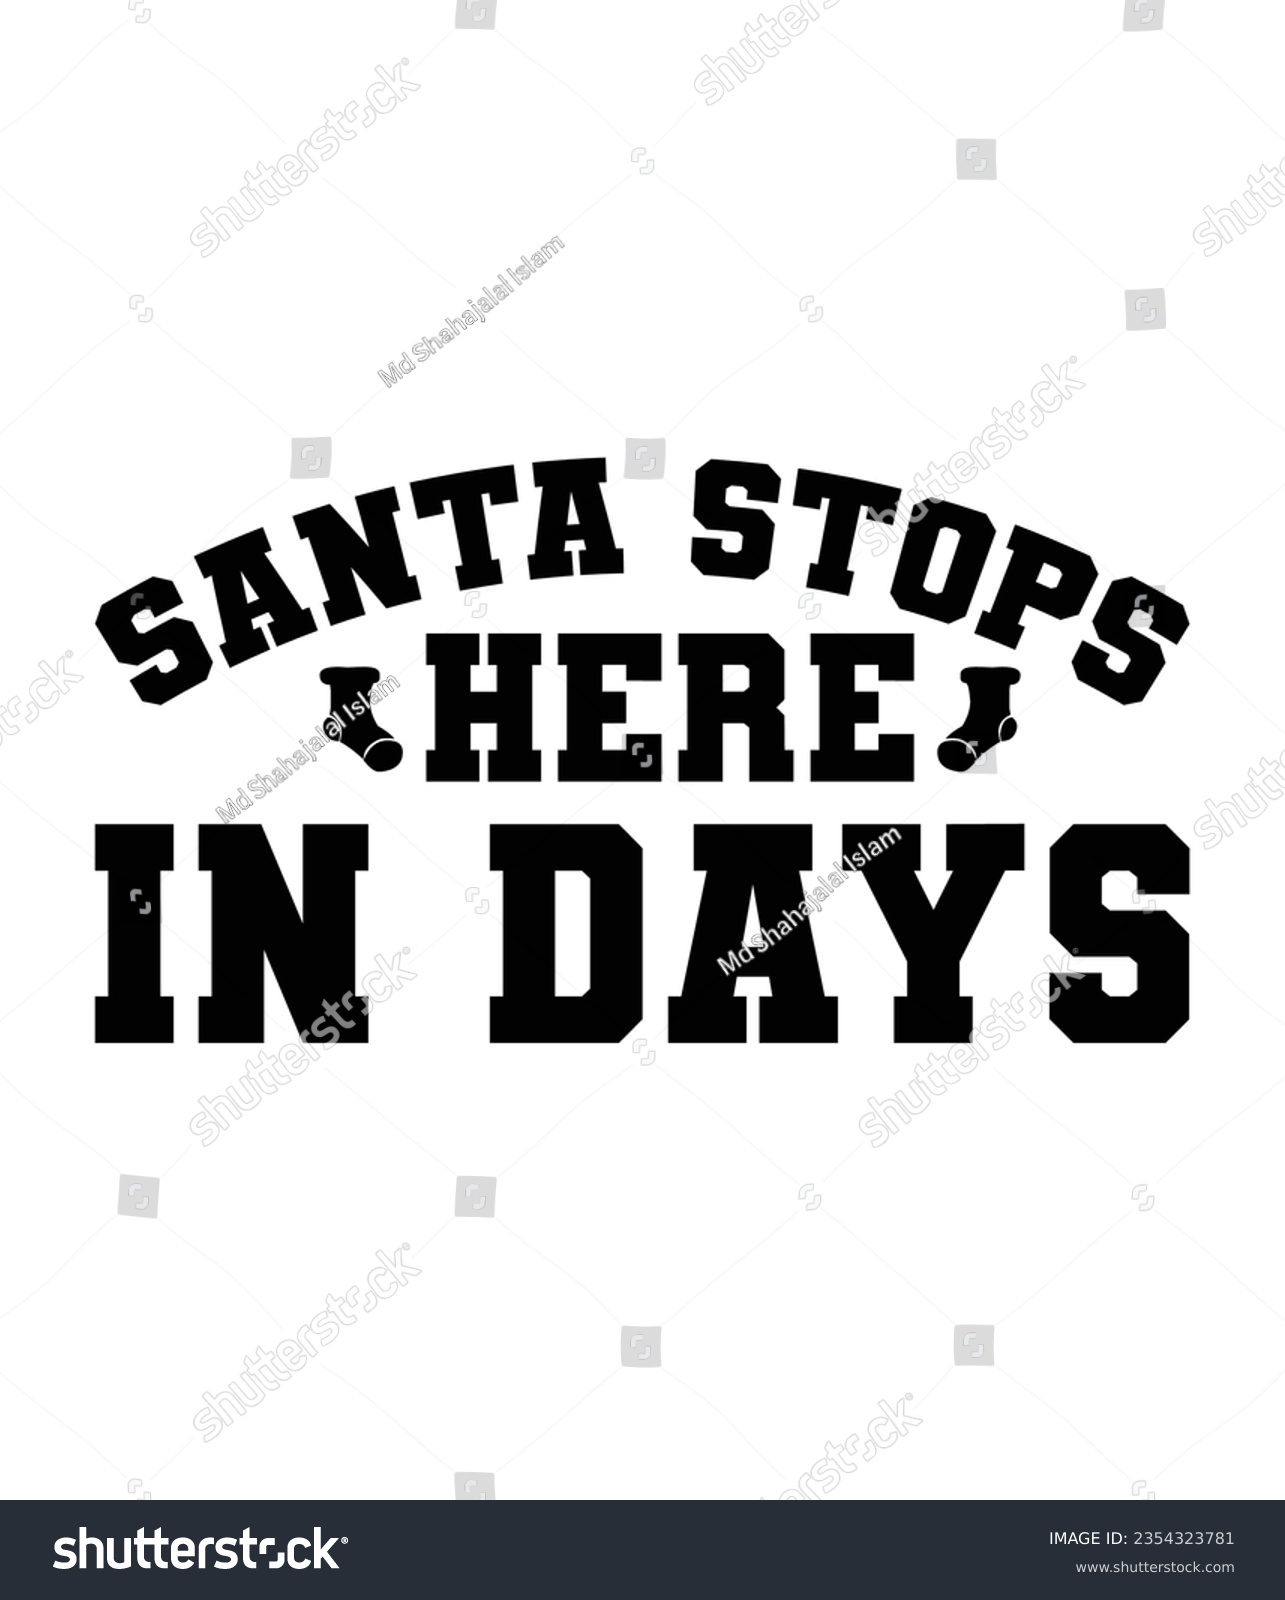 SVG of Santa stops here in days, Christmas SVG, Funny Christmas Quotes, Winter SVG, Merry Christmas, Santa SVG, typography, vintage, t shirts design, Holiday shirt svg